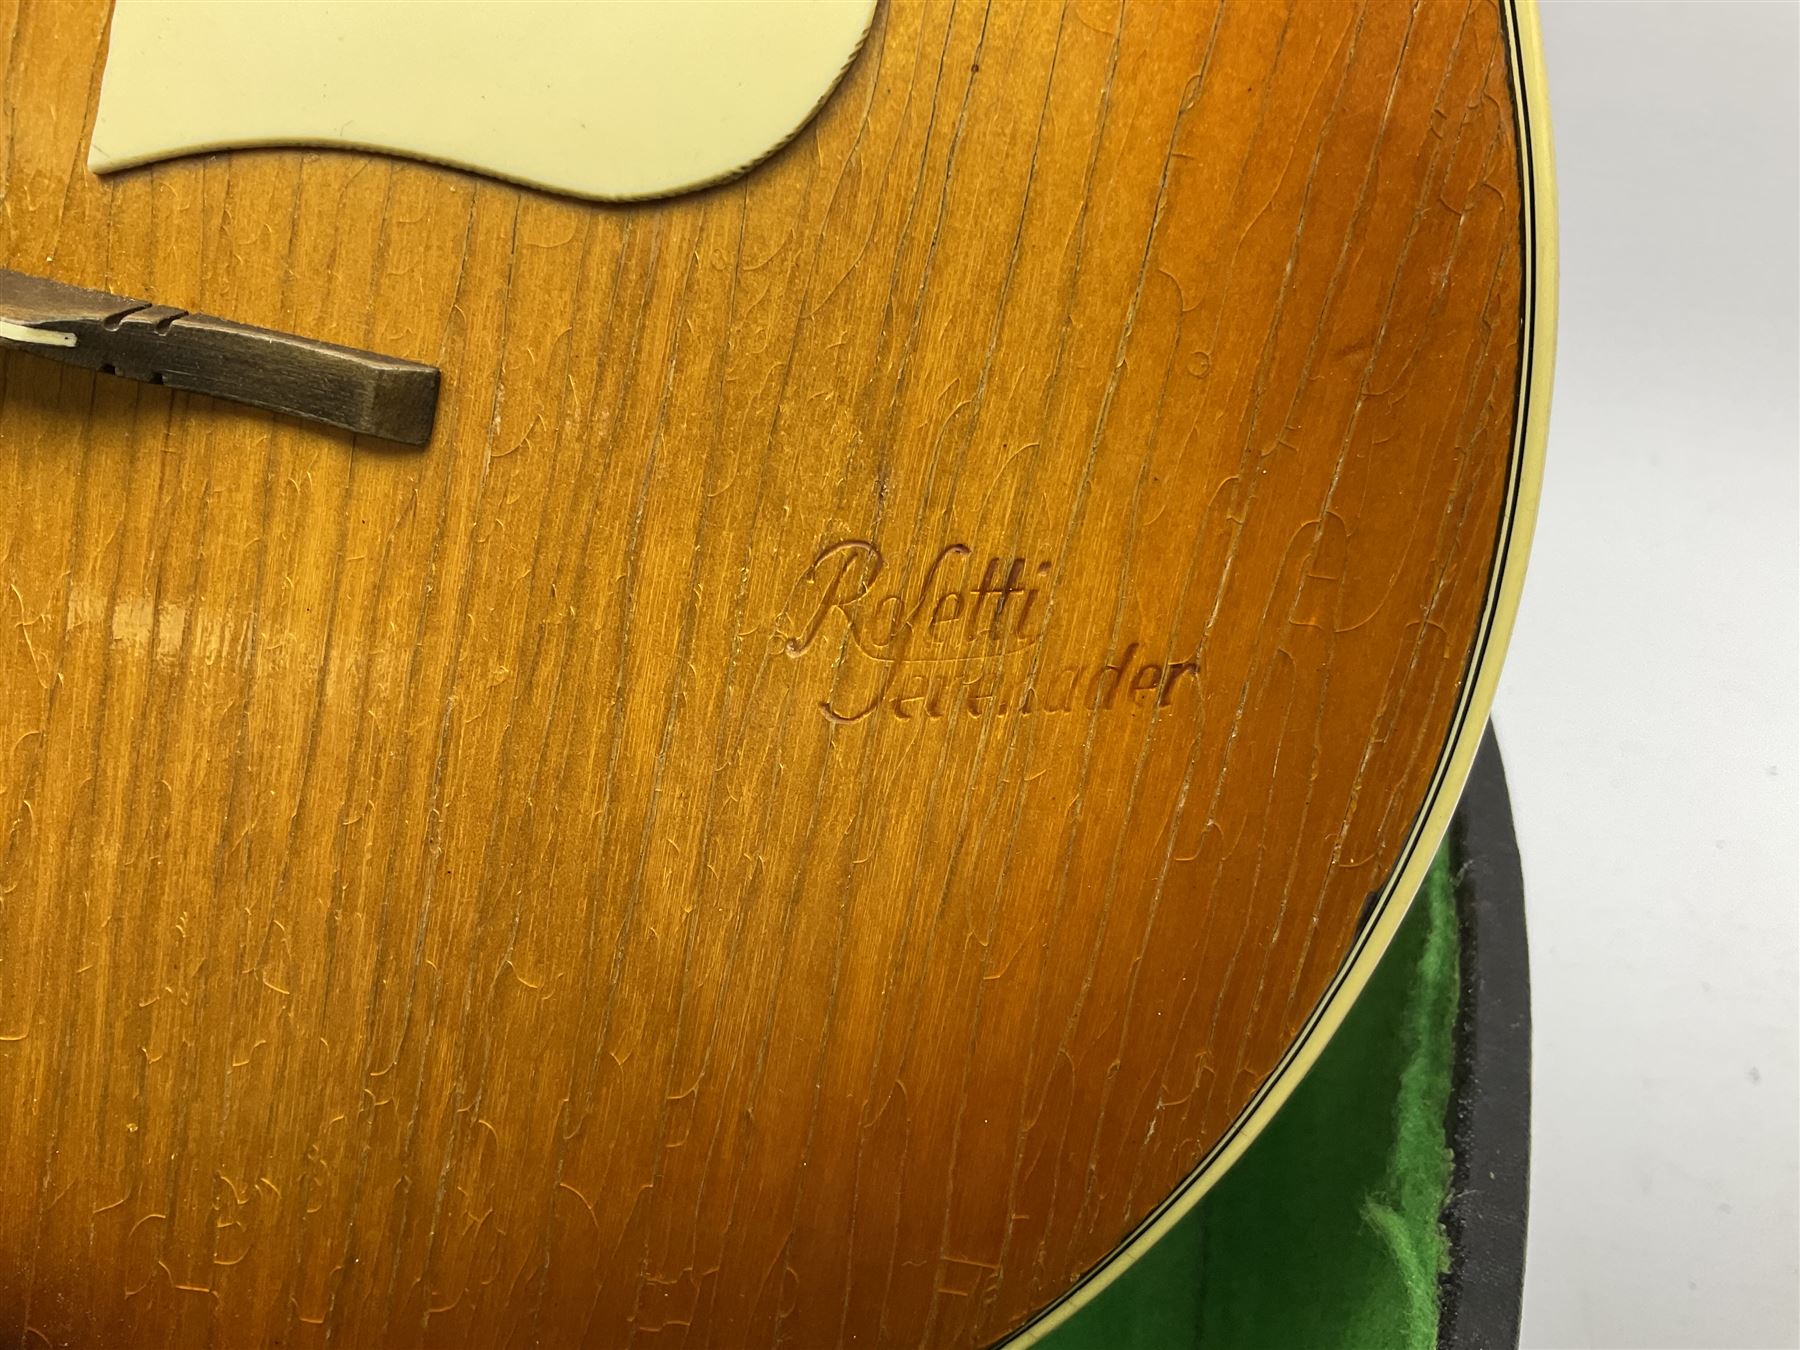 Rosetti Serenader eight-string mandolin with slightly bowed segmented maple back and ribs and ivorin - Image 3 of 13